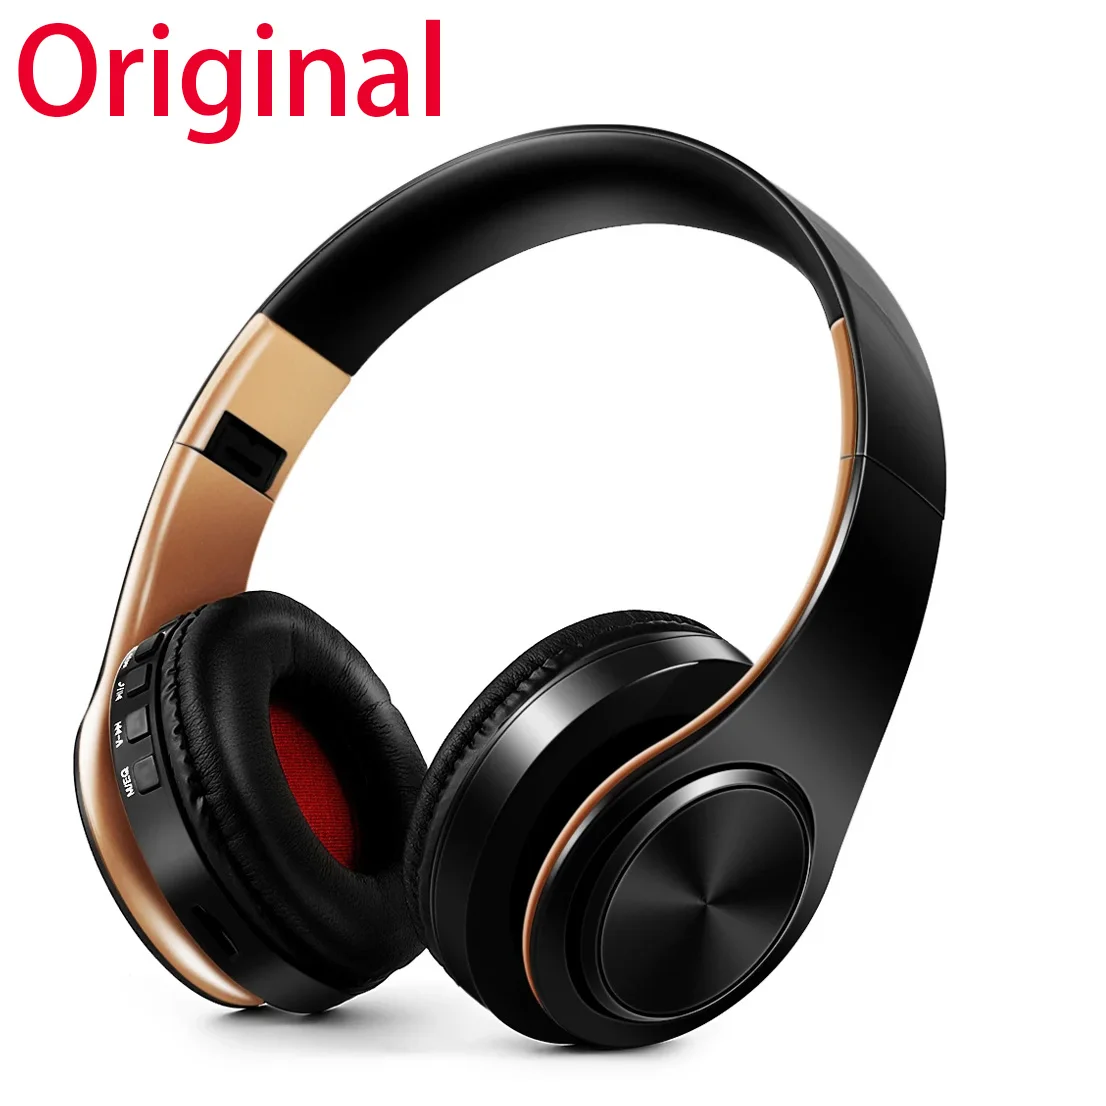 Original Hi-fi stereo headset Bluetooth headset Music headset FM and support SD card with microphone mobile Xiaomi Iphone tablet